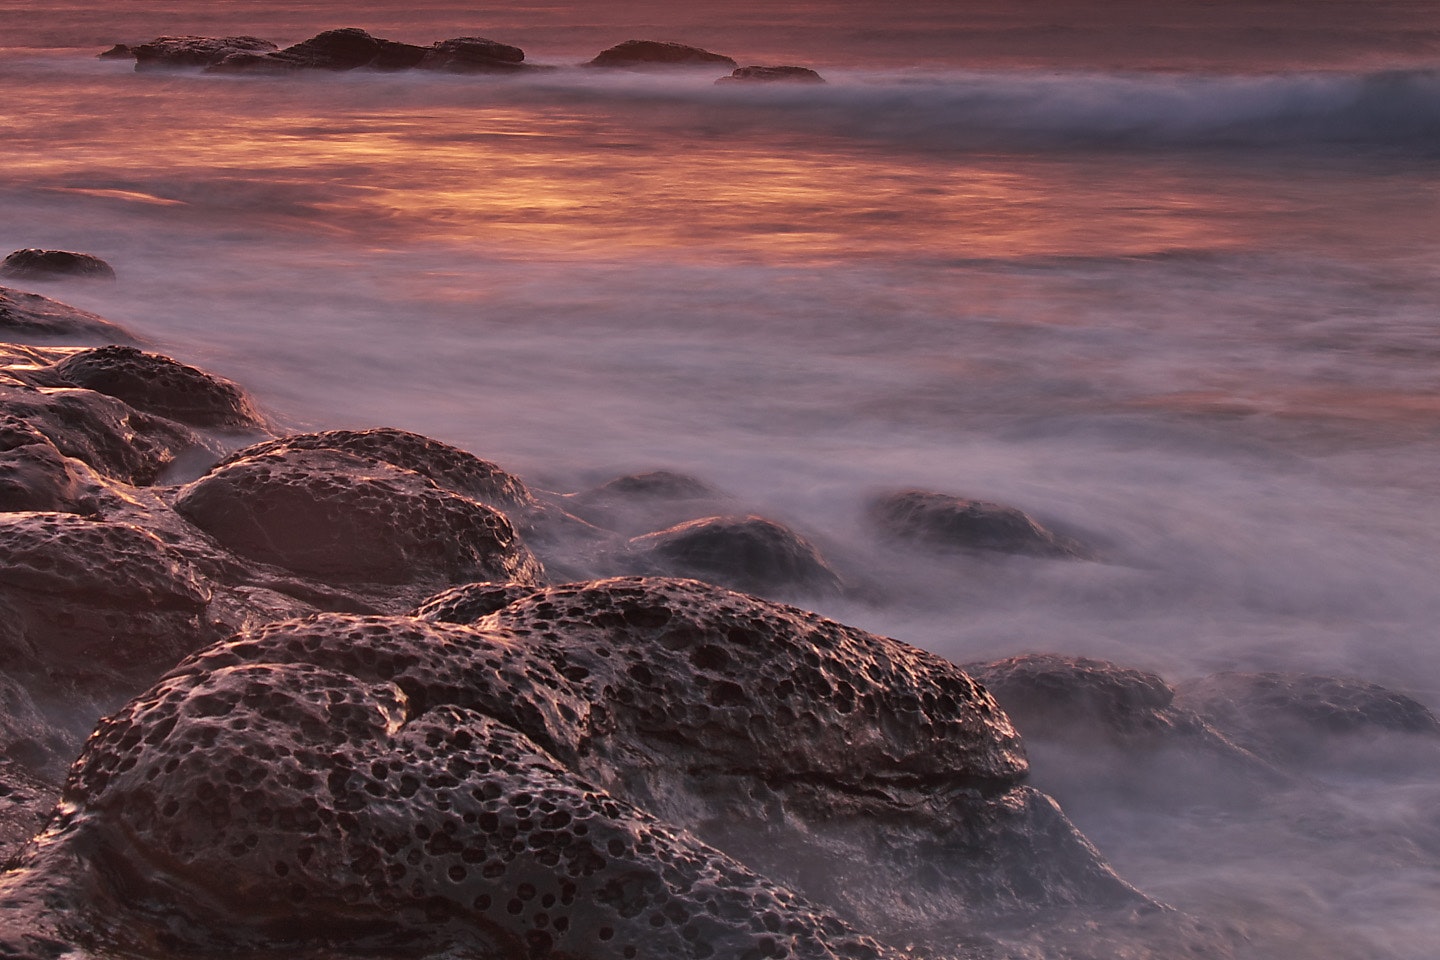 Brown and Black Rock Formations With Fog during Sunset, Beach, Dawn, Dusk, Mist, HQ Photo